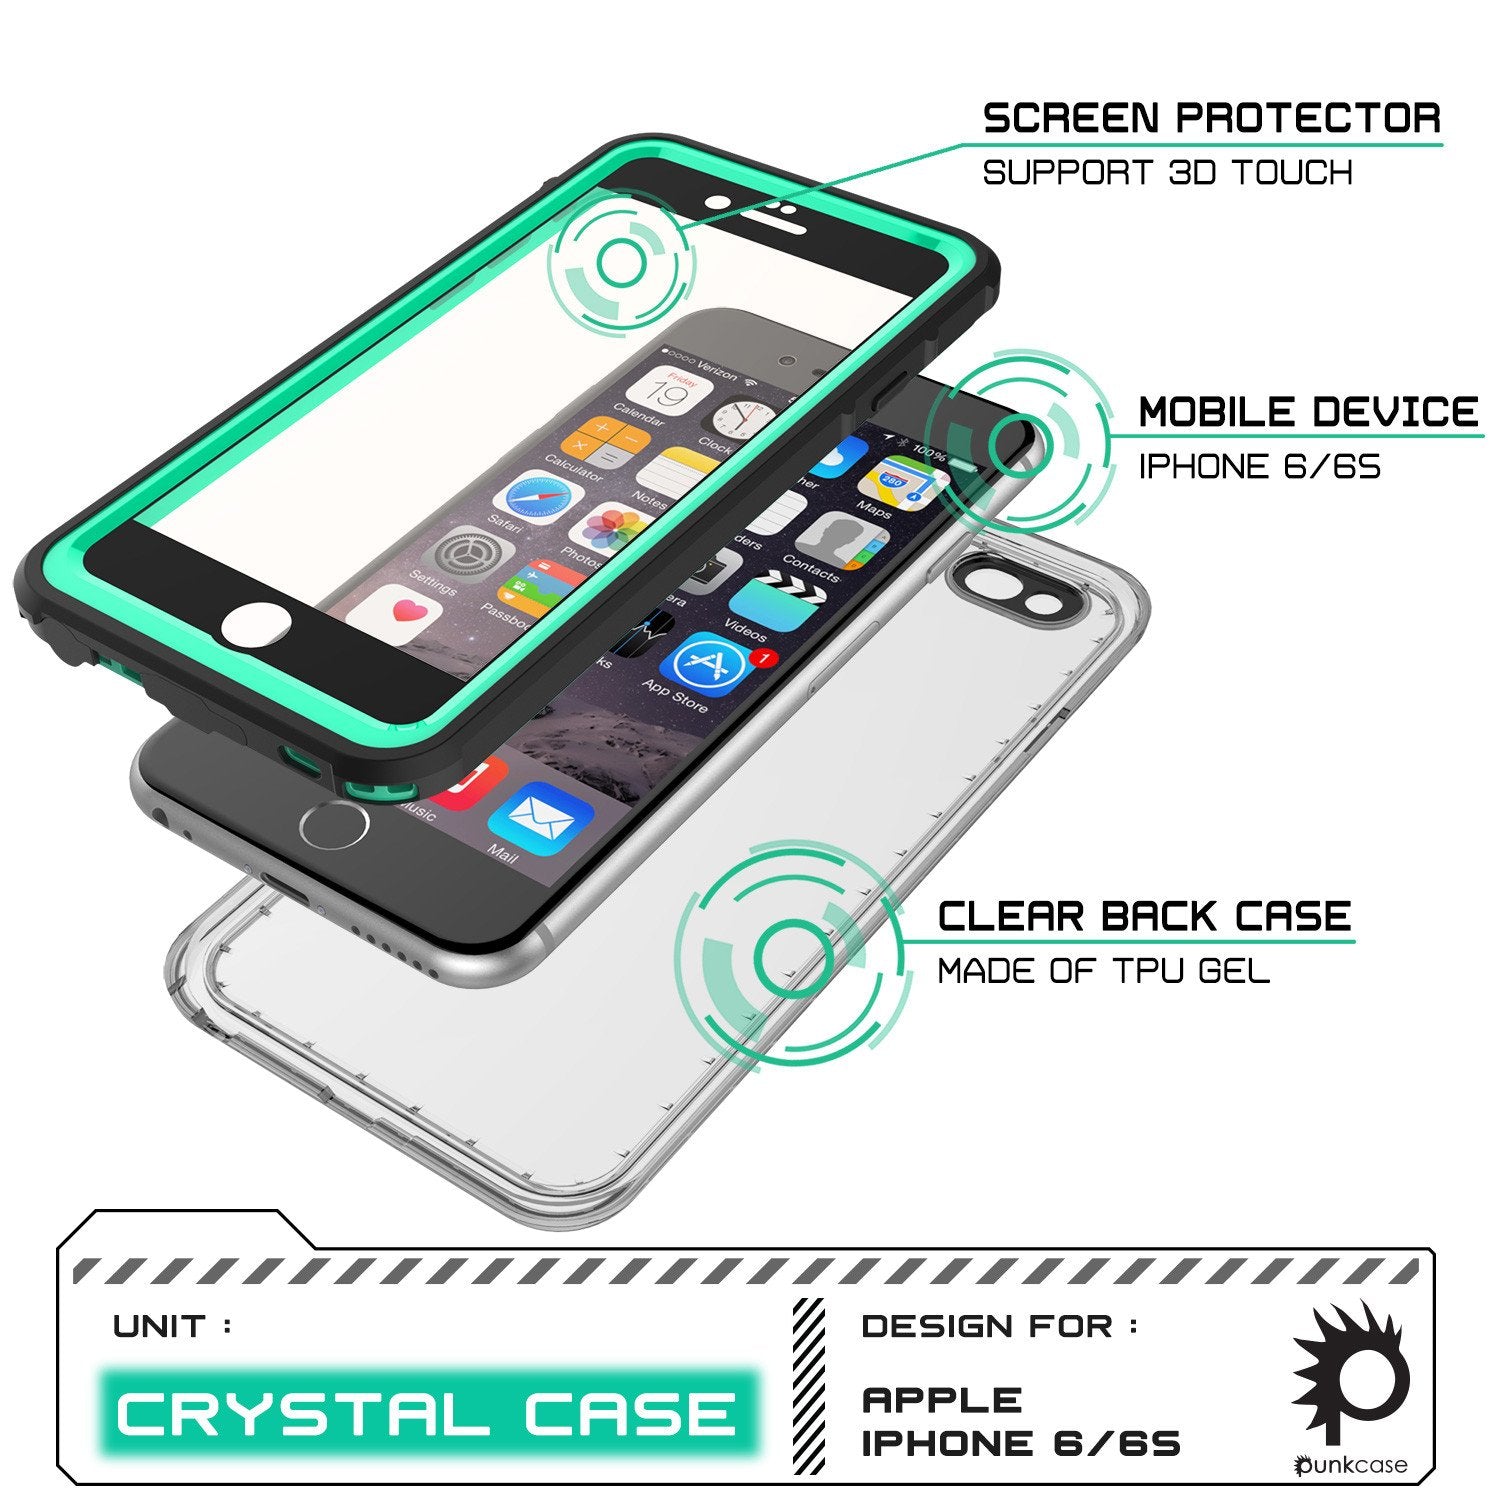 iPhone 6/6S Waterproof Case, PUNKcase CRYSTAL Teal W/ Attached Screen Protector  | Warranty